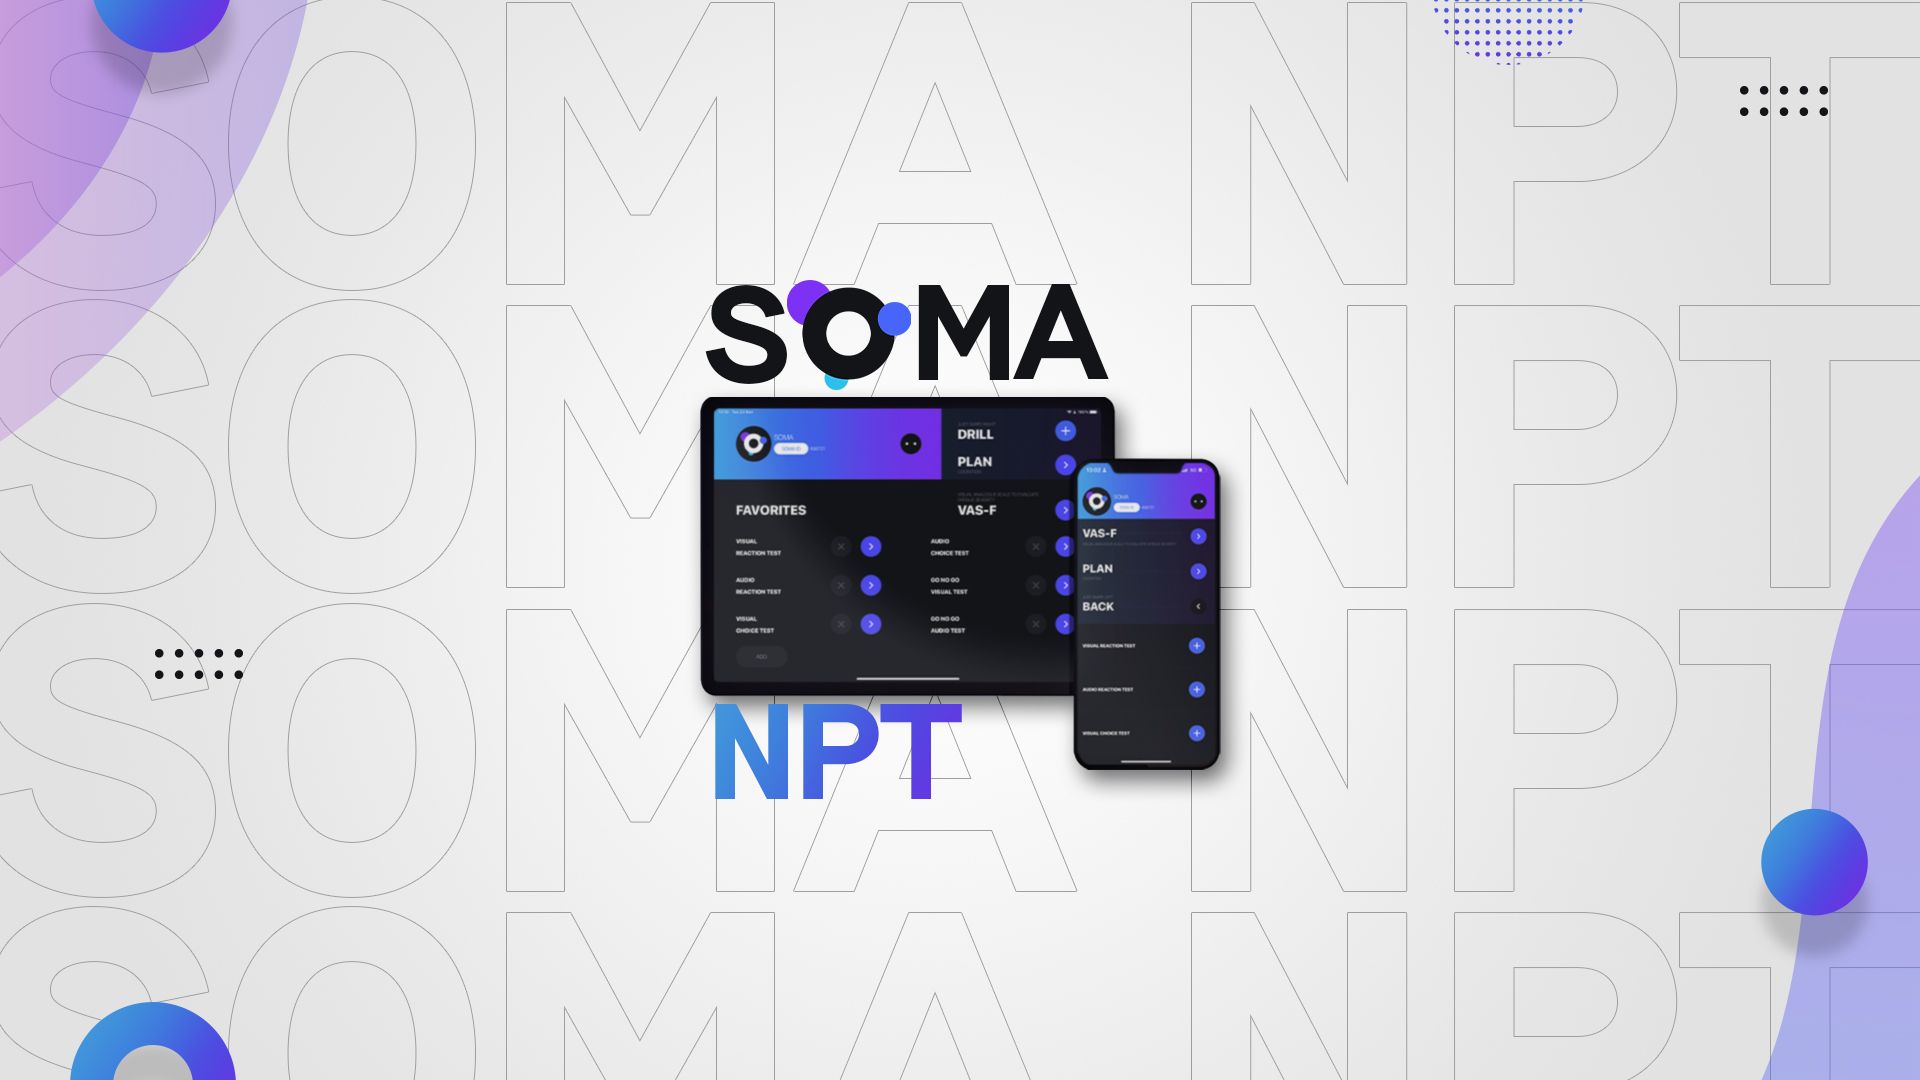 What is Soma NPT?